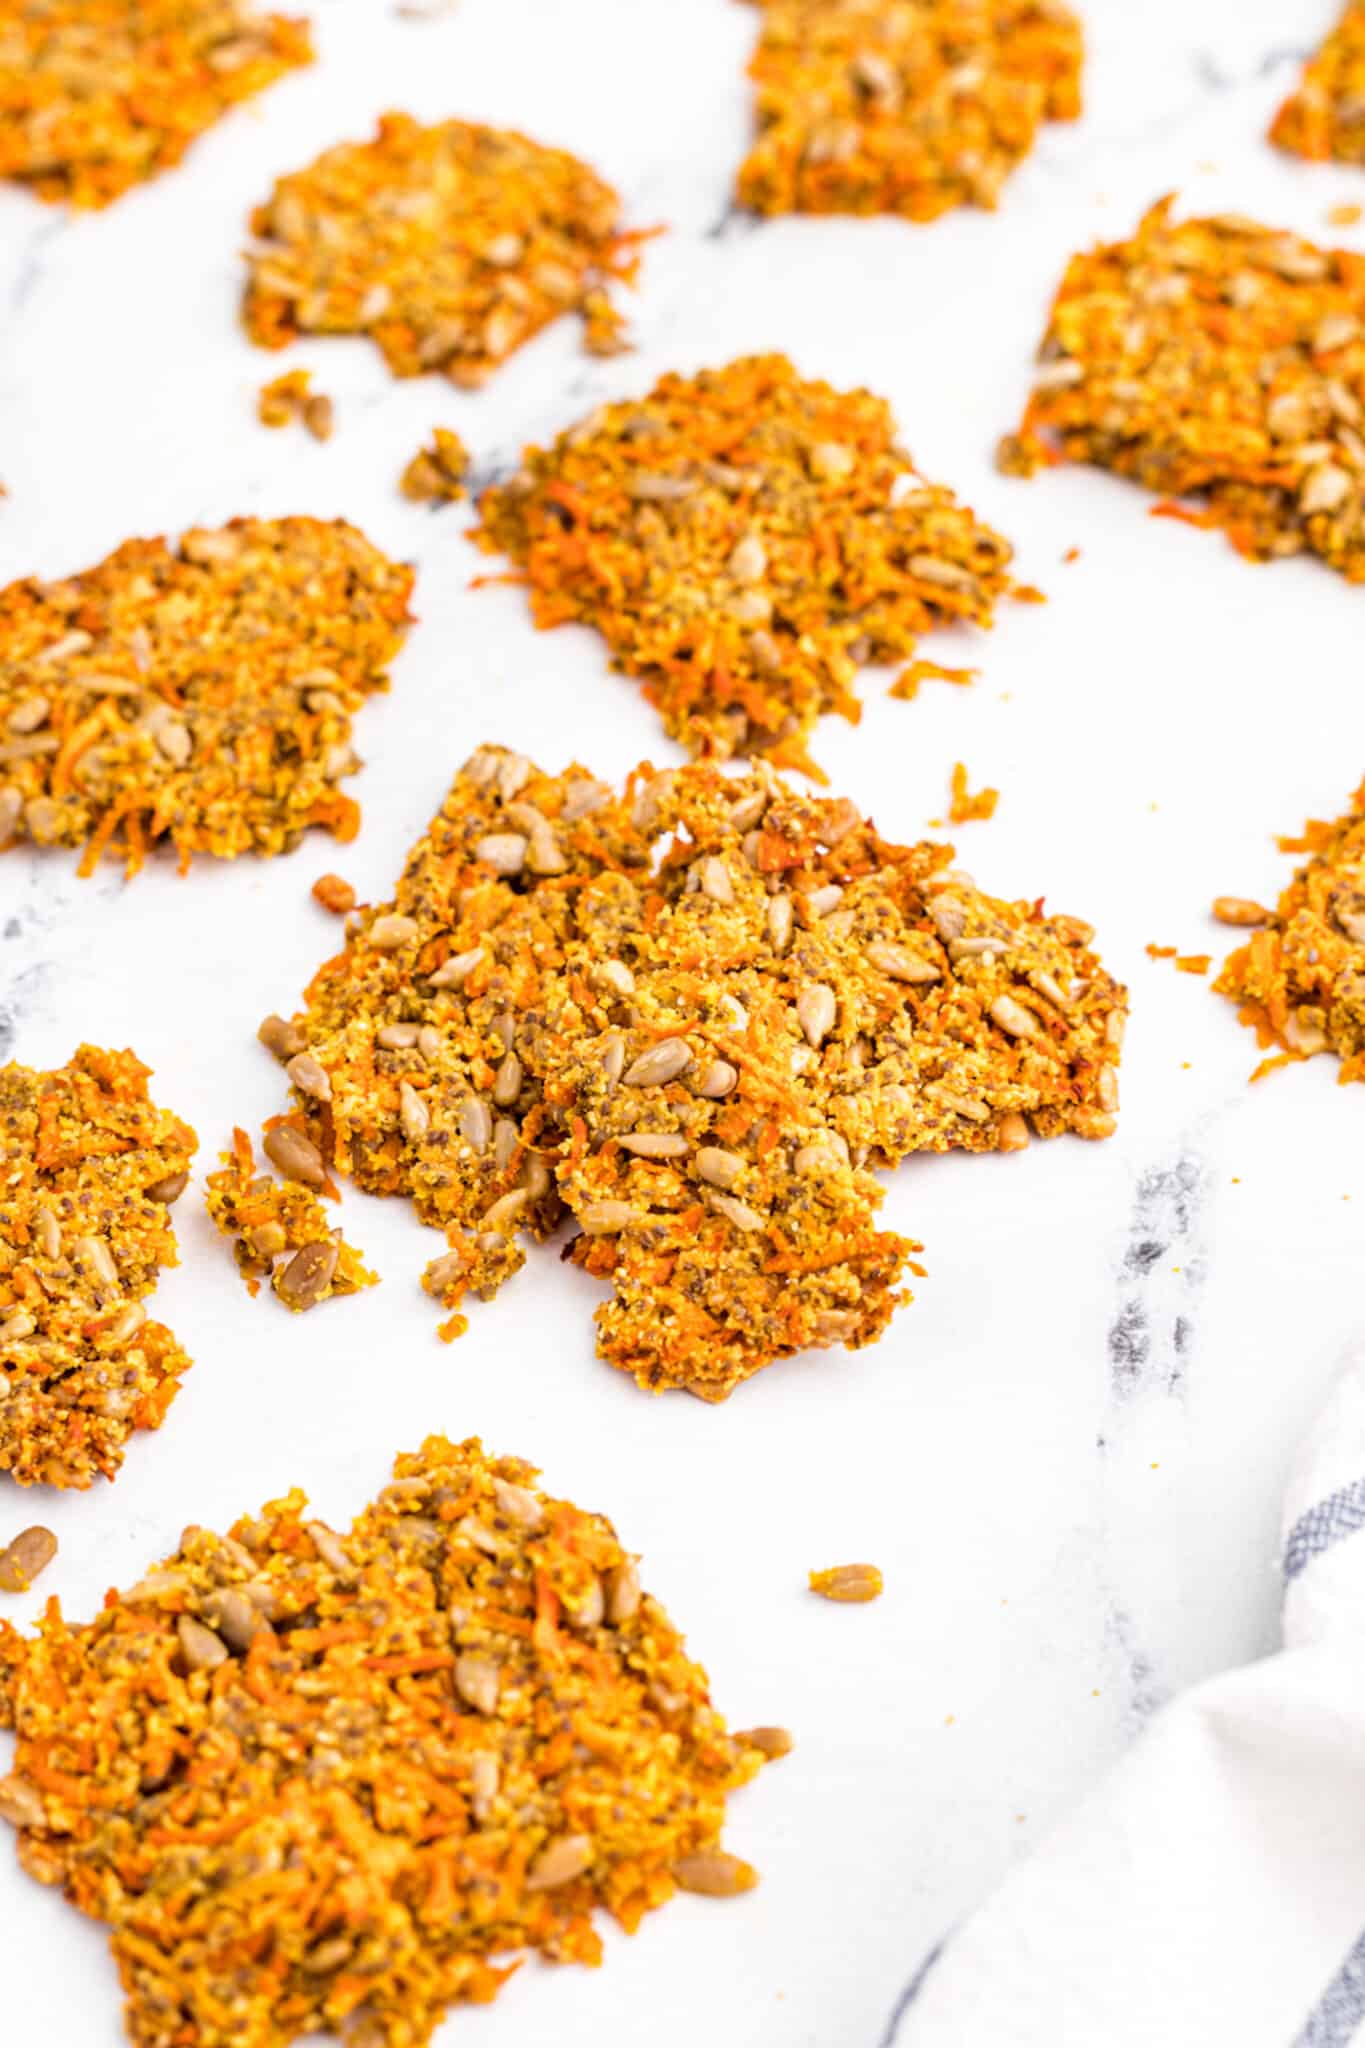 Baked carrot pulp crackers on a white surface.